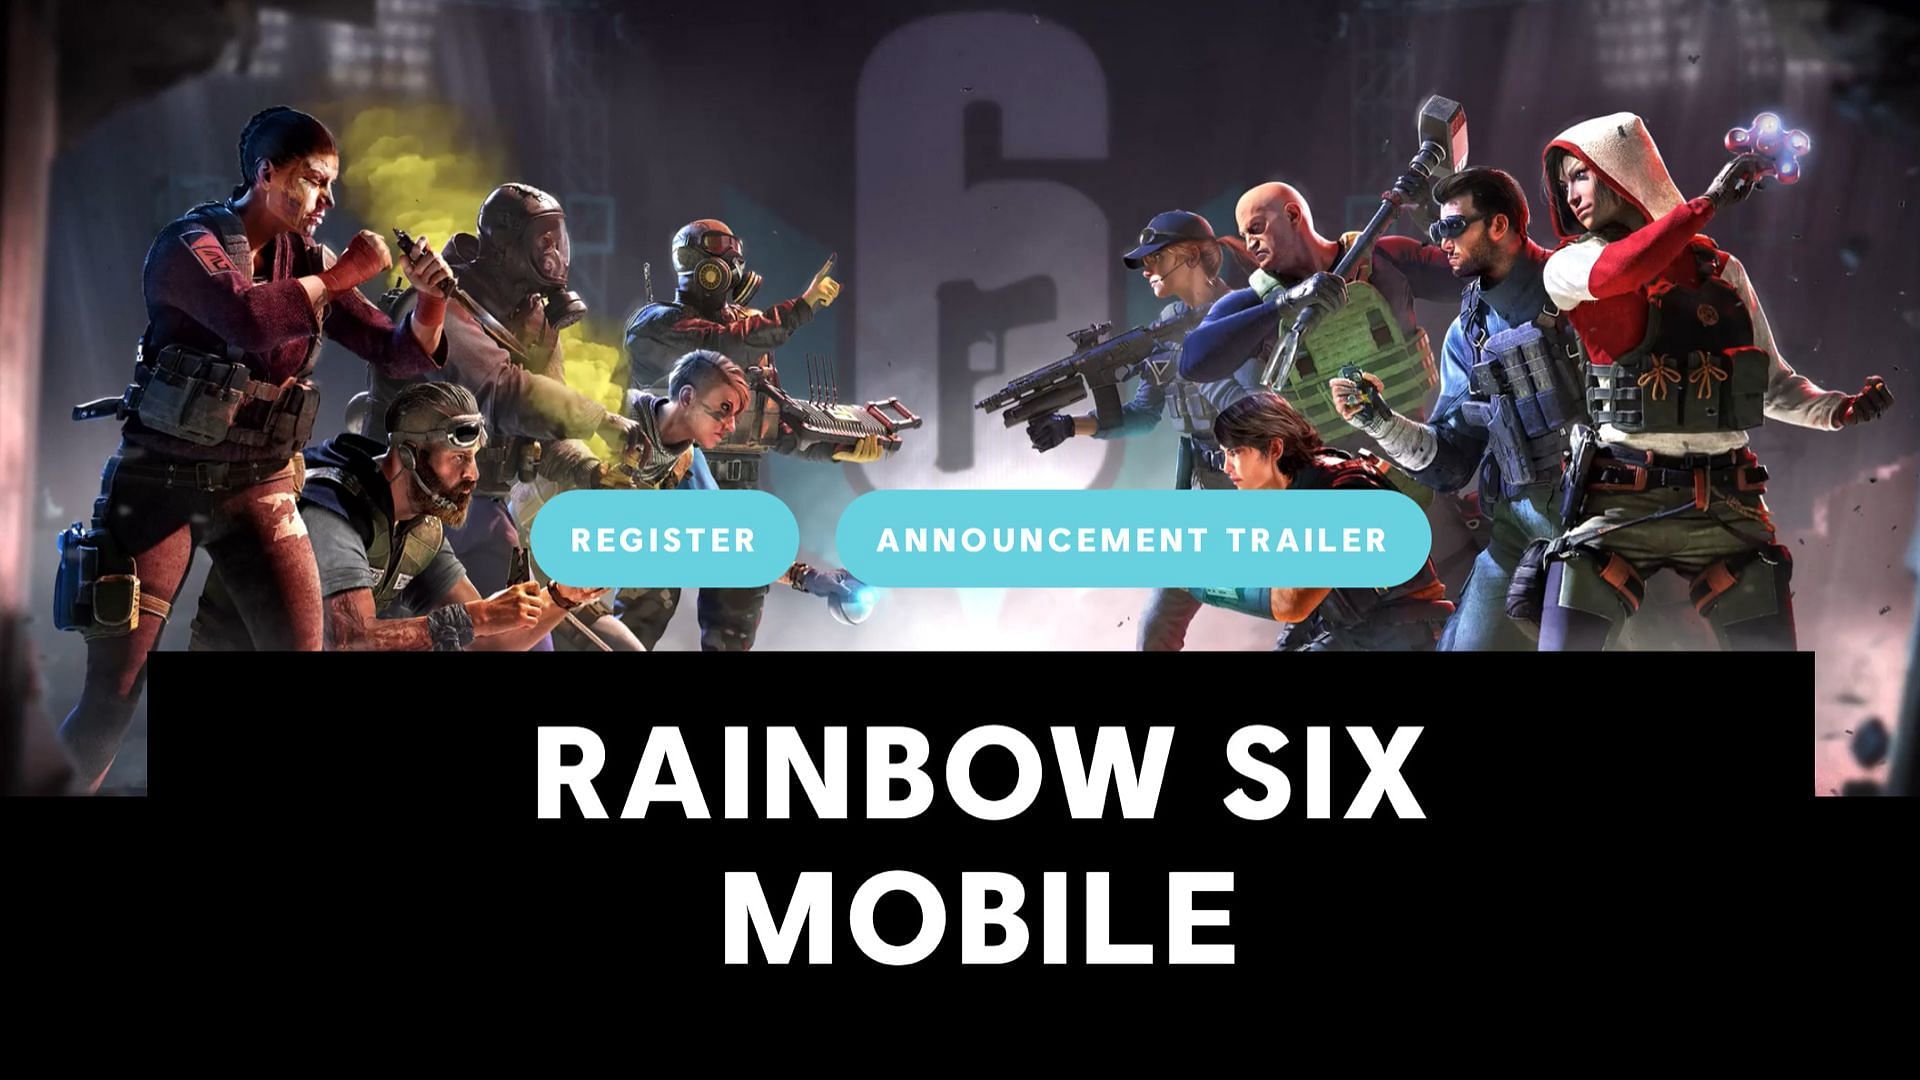 RAINBOW SIX MOBILE IS HERE! HOW TO PLAY ON iOS/ANDROID